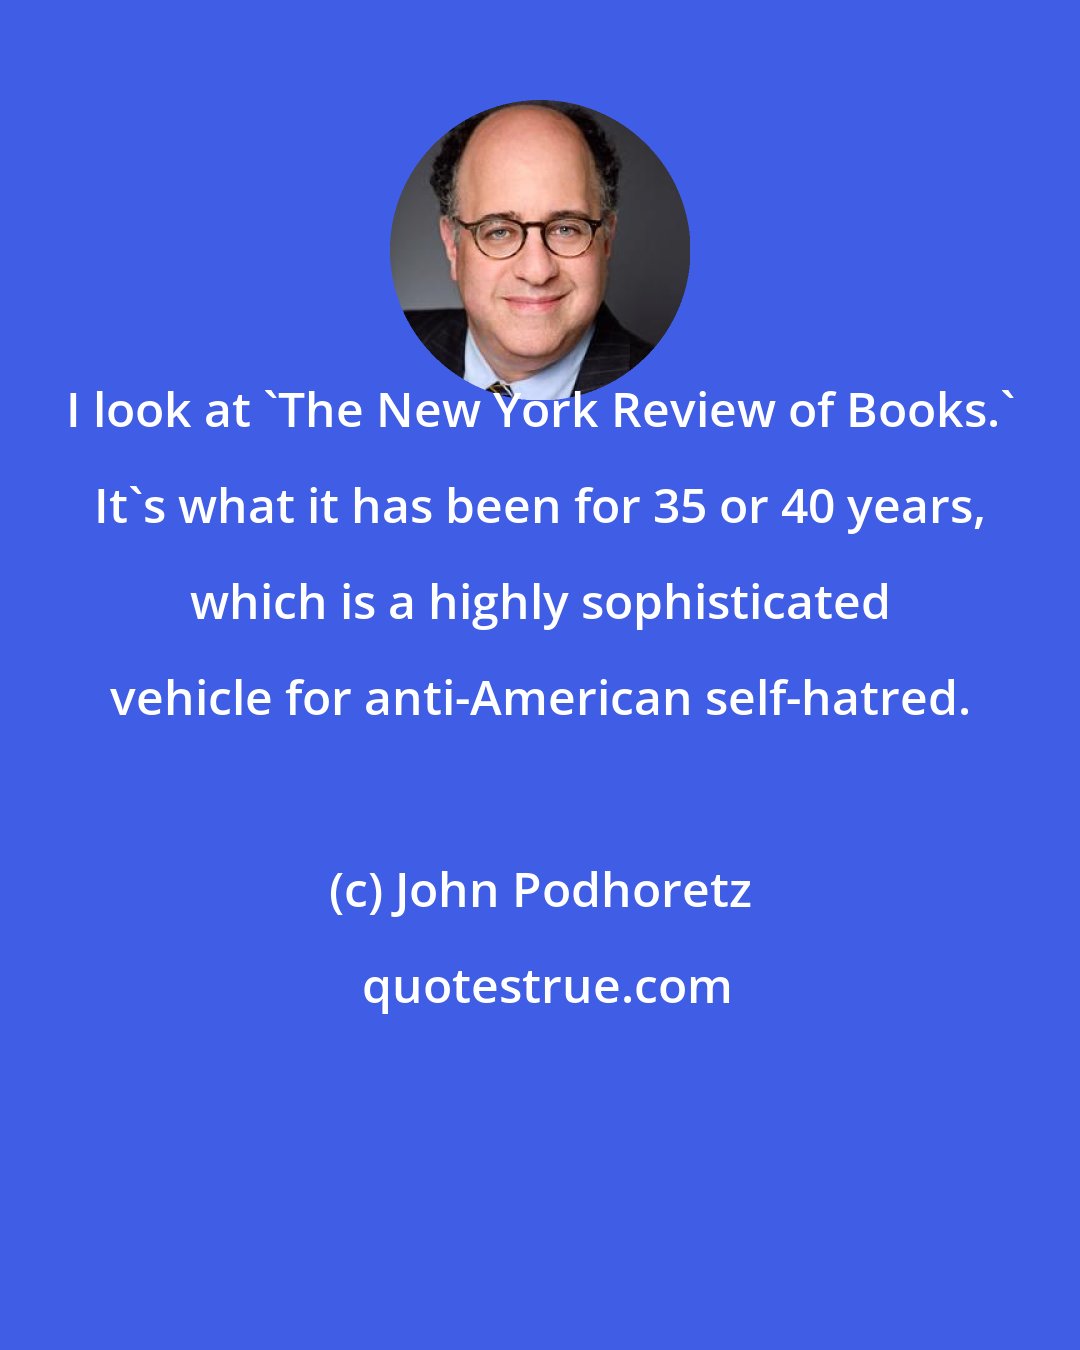 John Podhoretz: I look at 'The New York Review of Books.' It's what it has been for 35 or 40 years, which is a highly sophisticated vehicle for anti-American self-hatred.